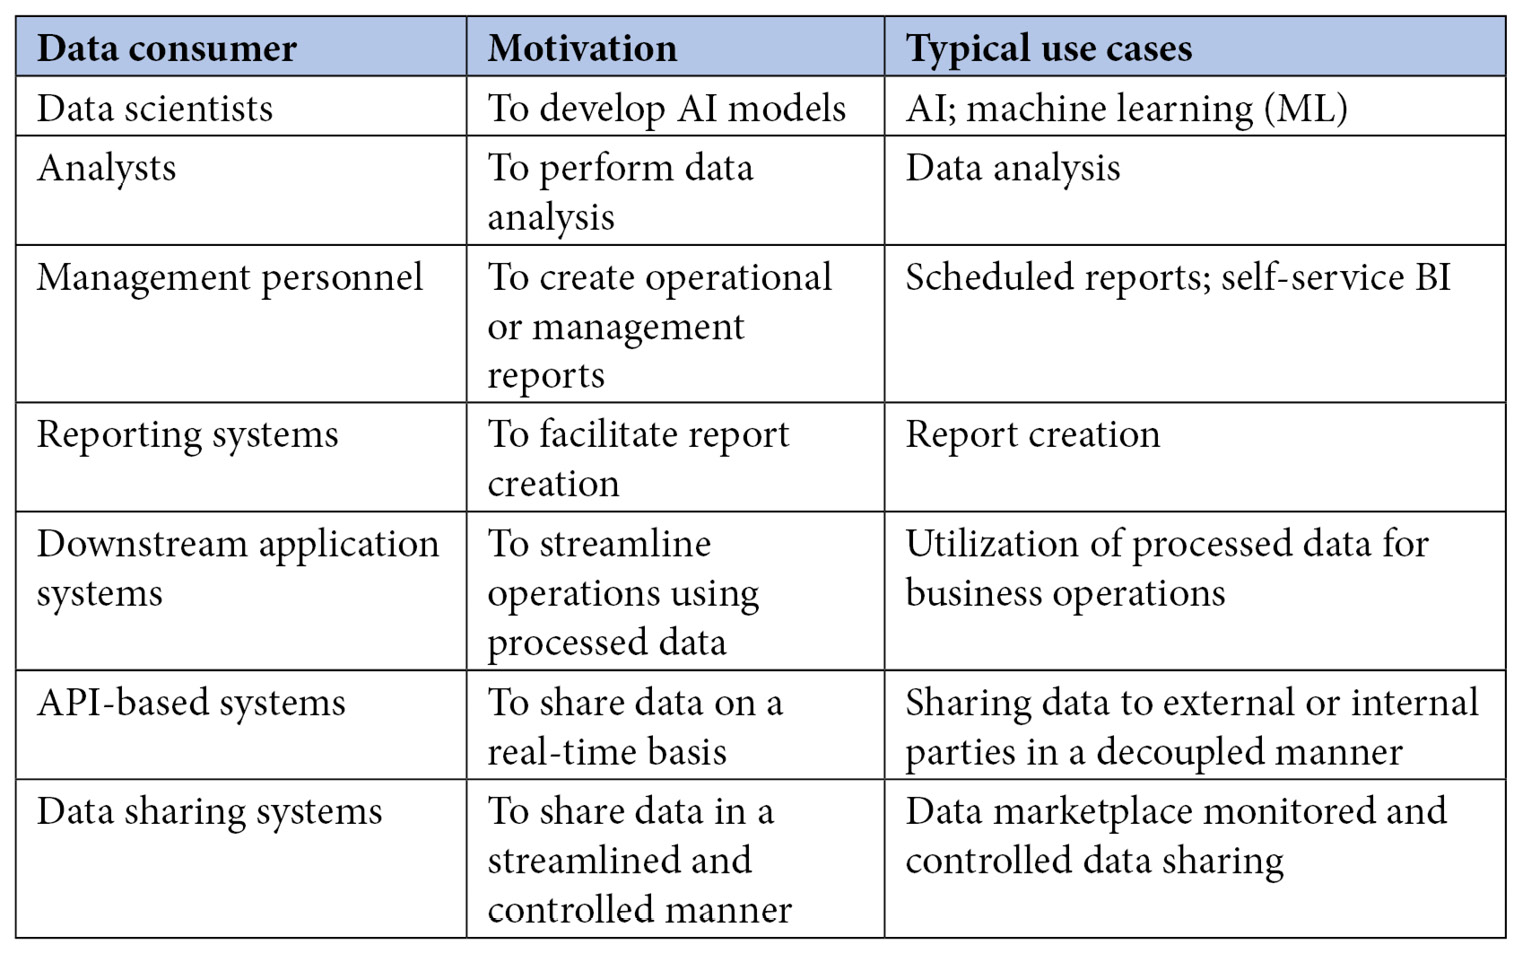 Figure 2.3 – Typical data consumers and use cases
